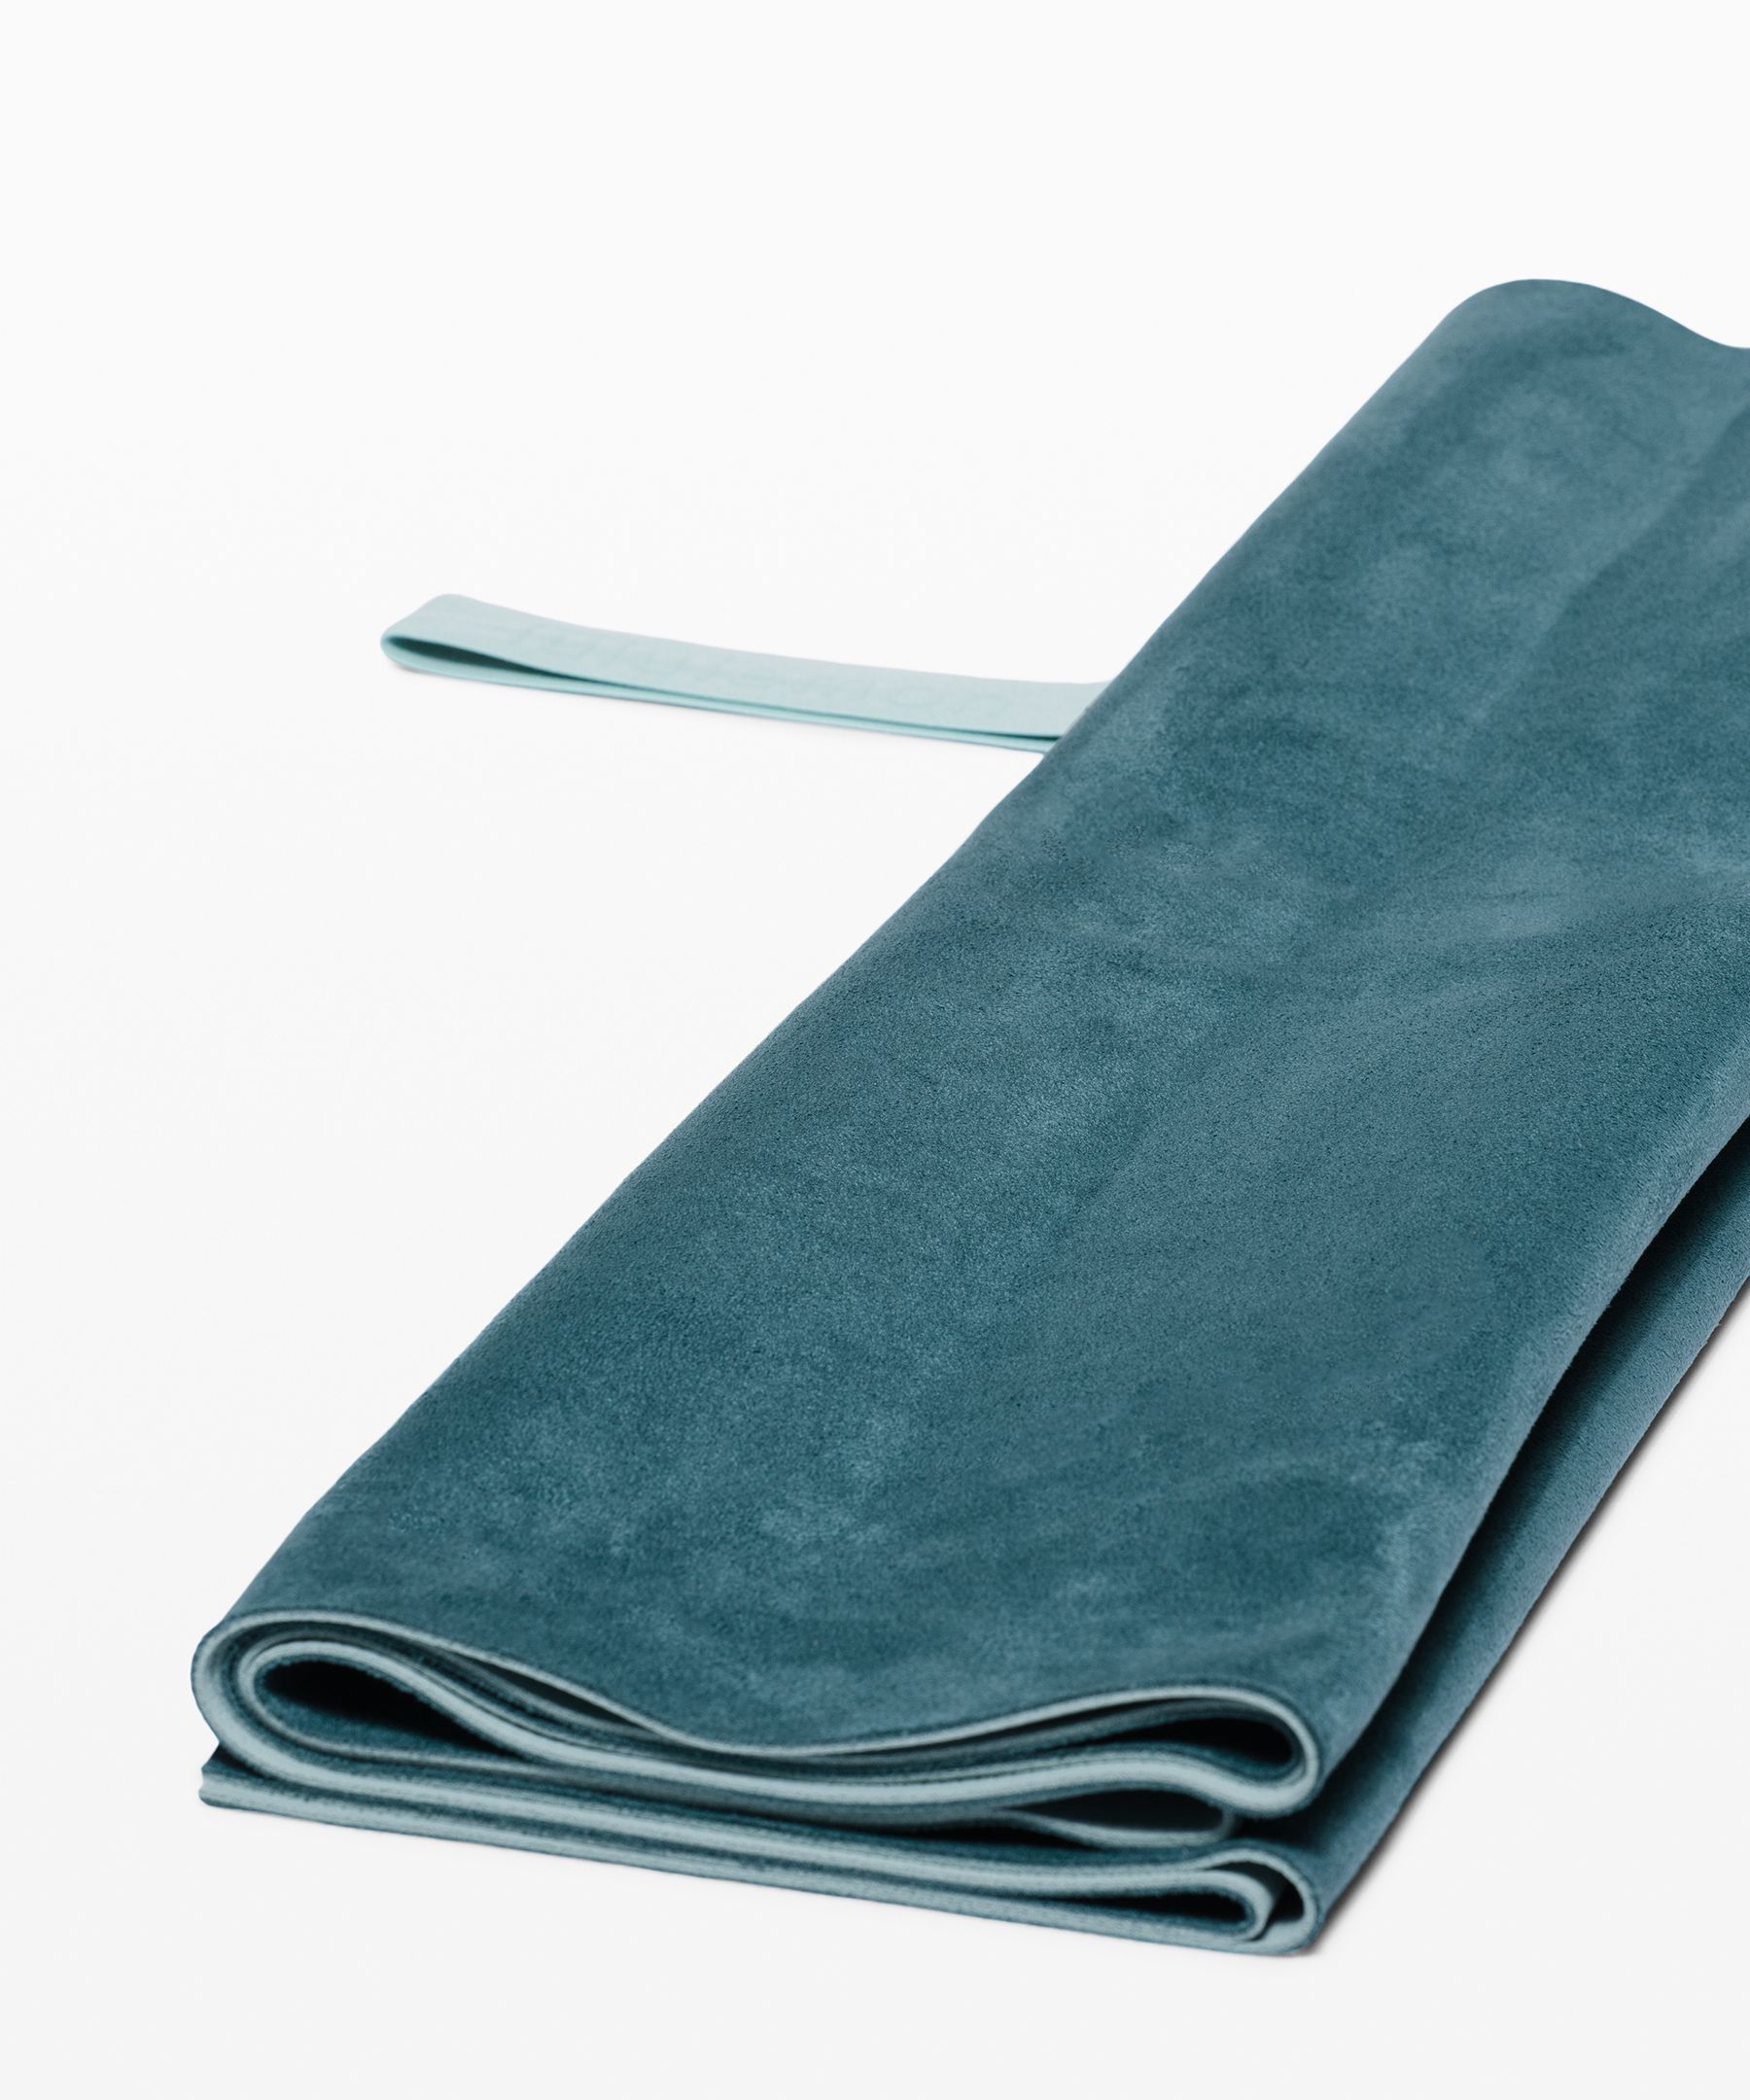 Find more Lululemon Travel Yoga Mat for sale at up to 90% off